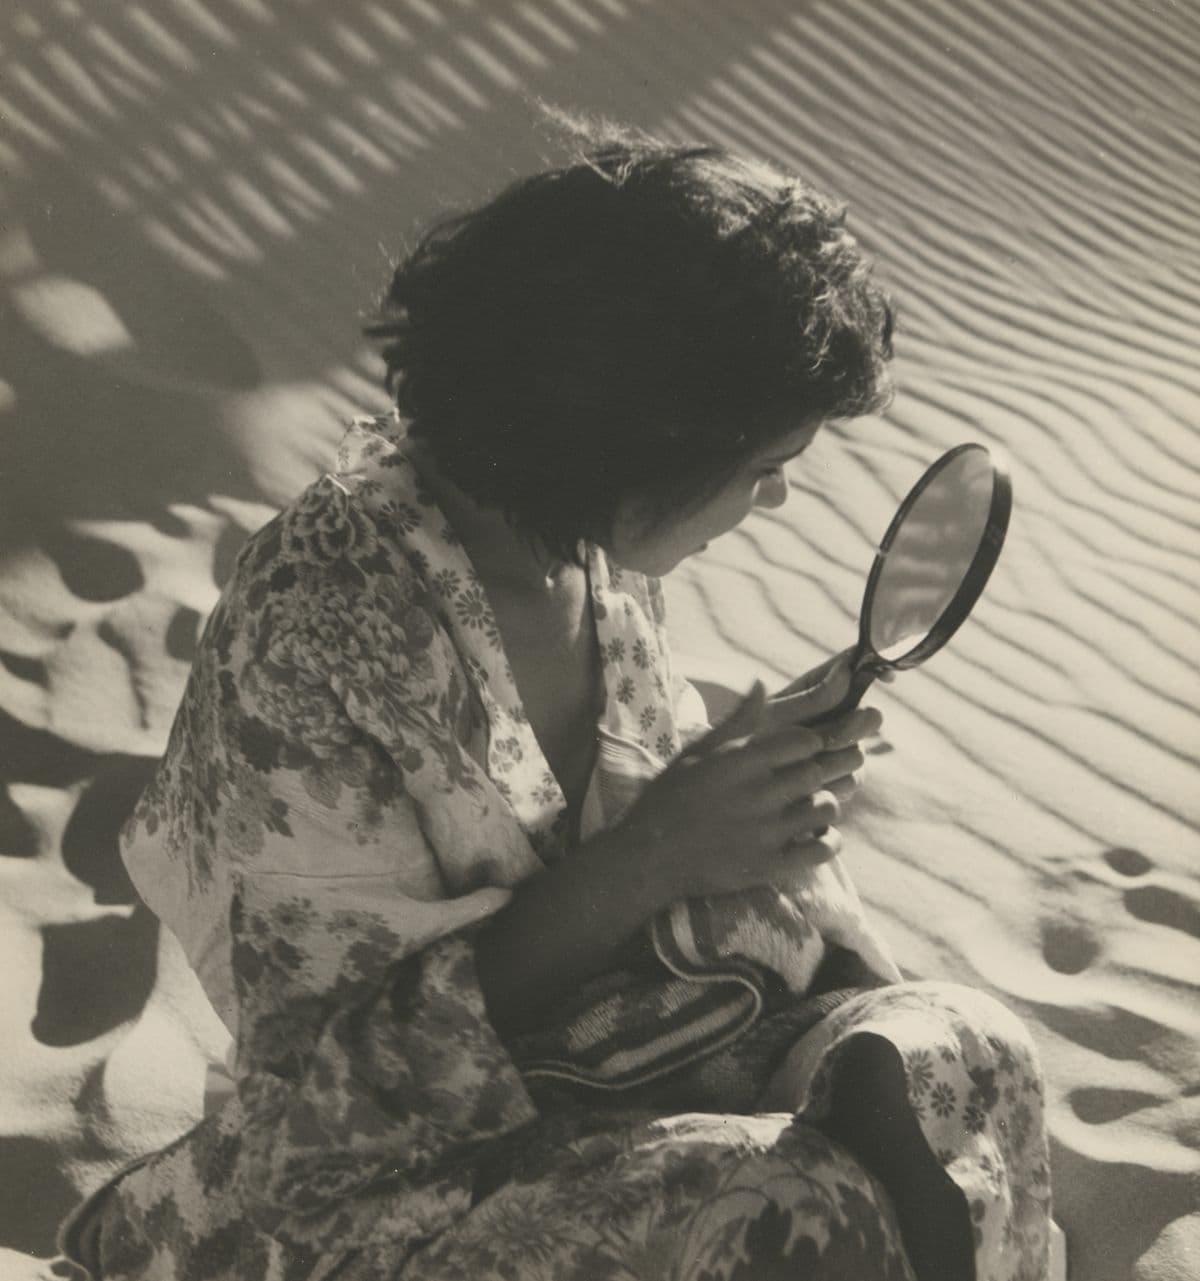 Photo of a woman's side profile as she looks into a hand mirror